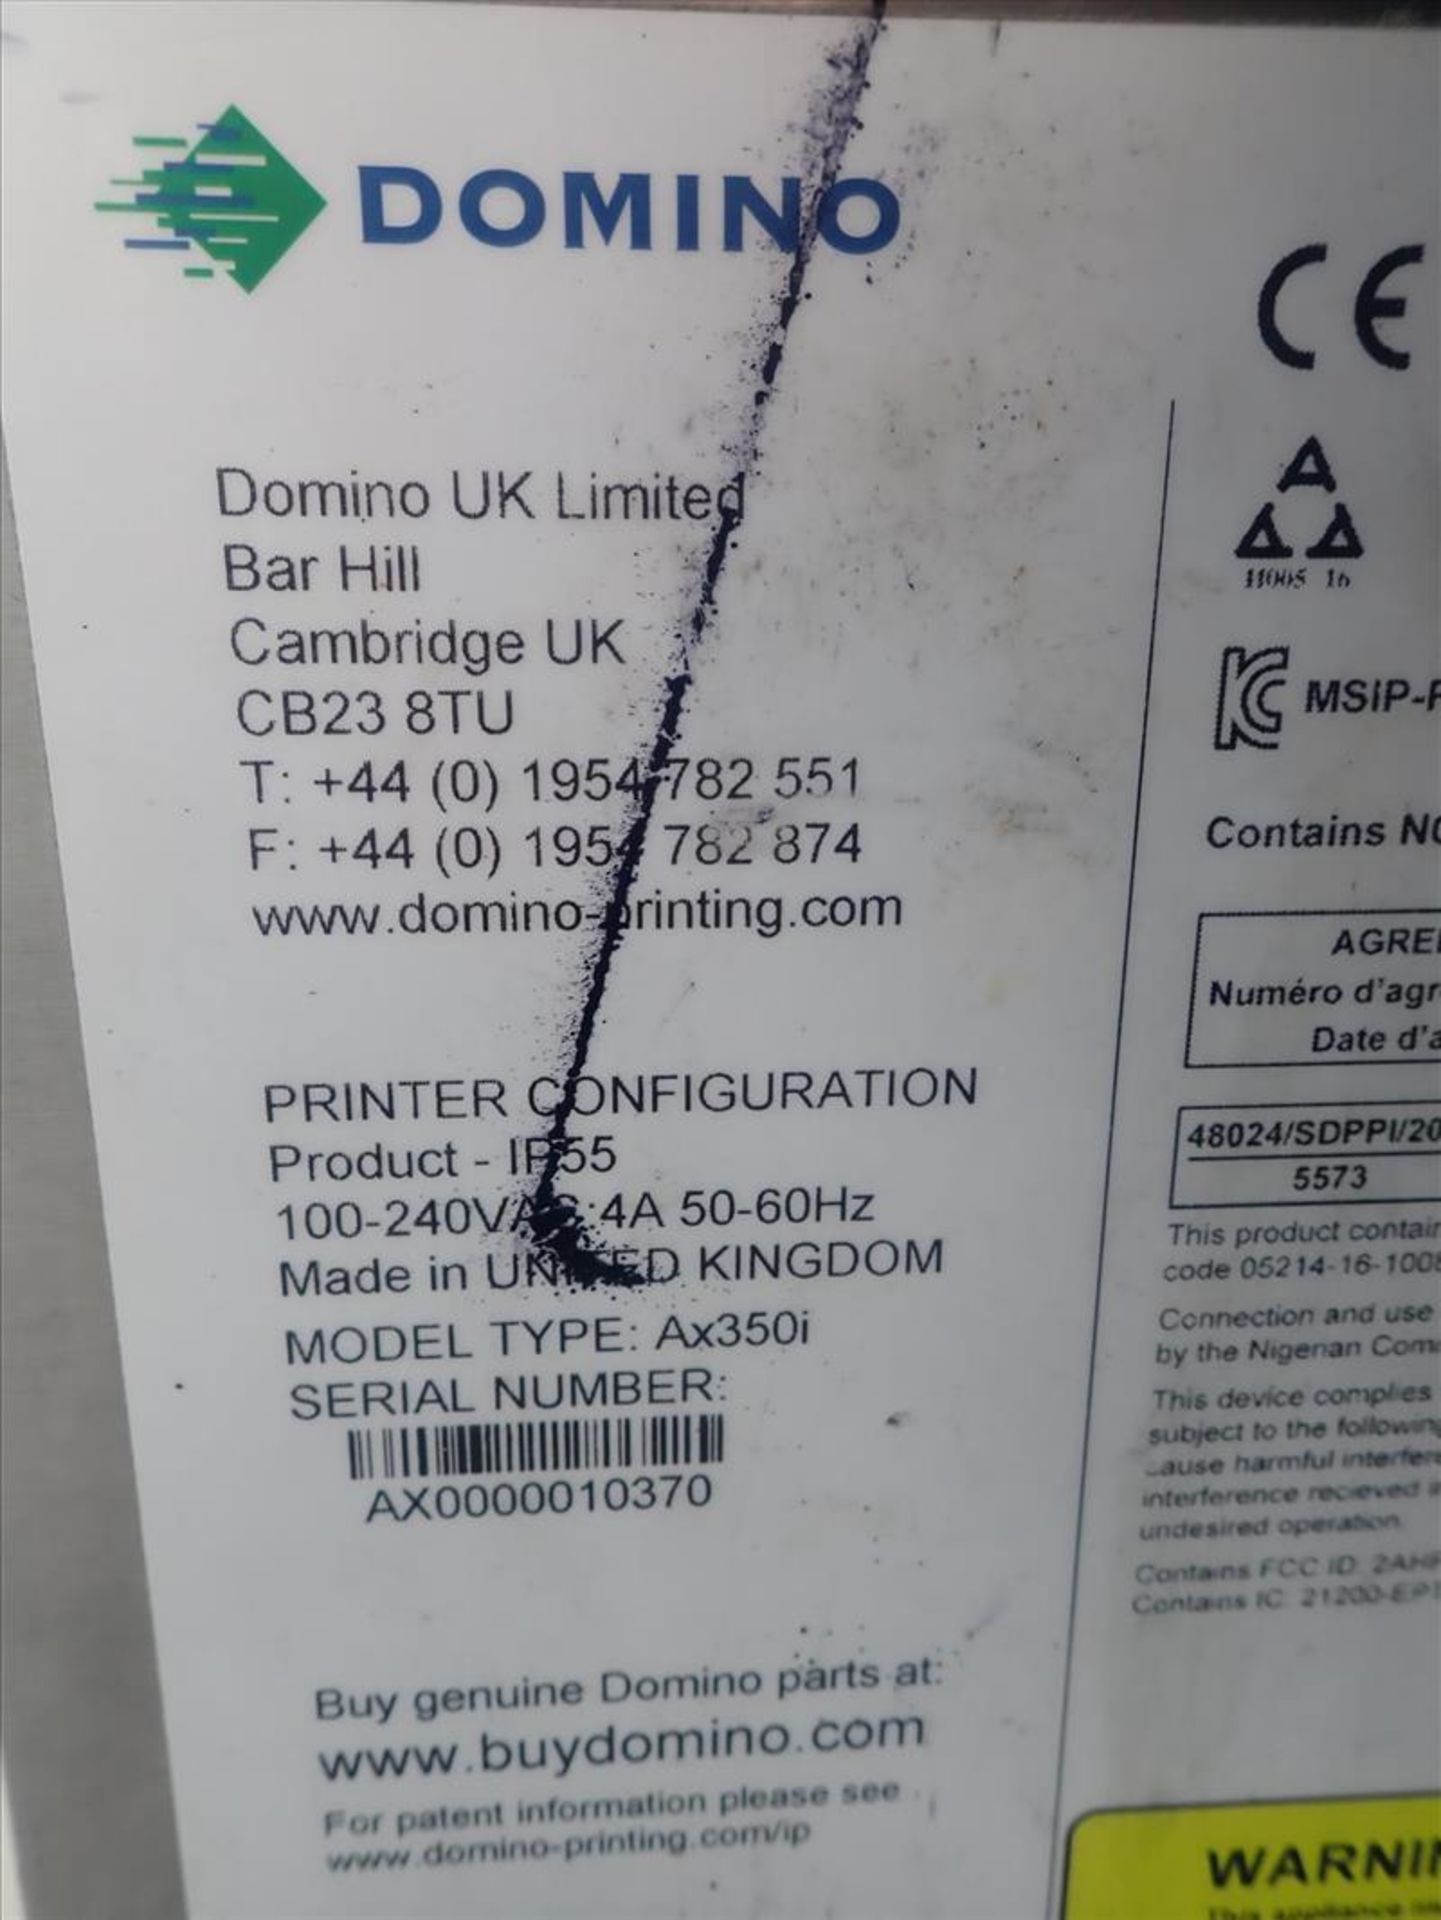 Domino inkjet printer/coder, mod. AX350i, ser. no. AX0000010370, stainless steel w/ print head and - Image 4 of 4